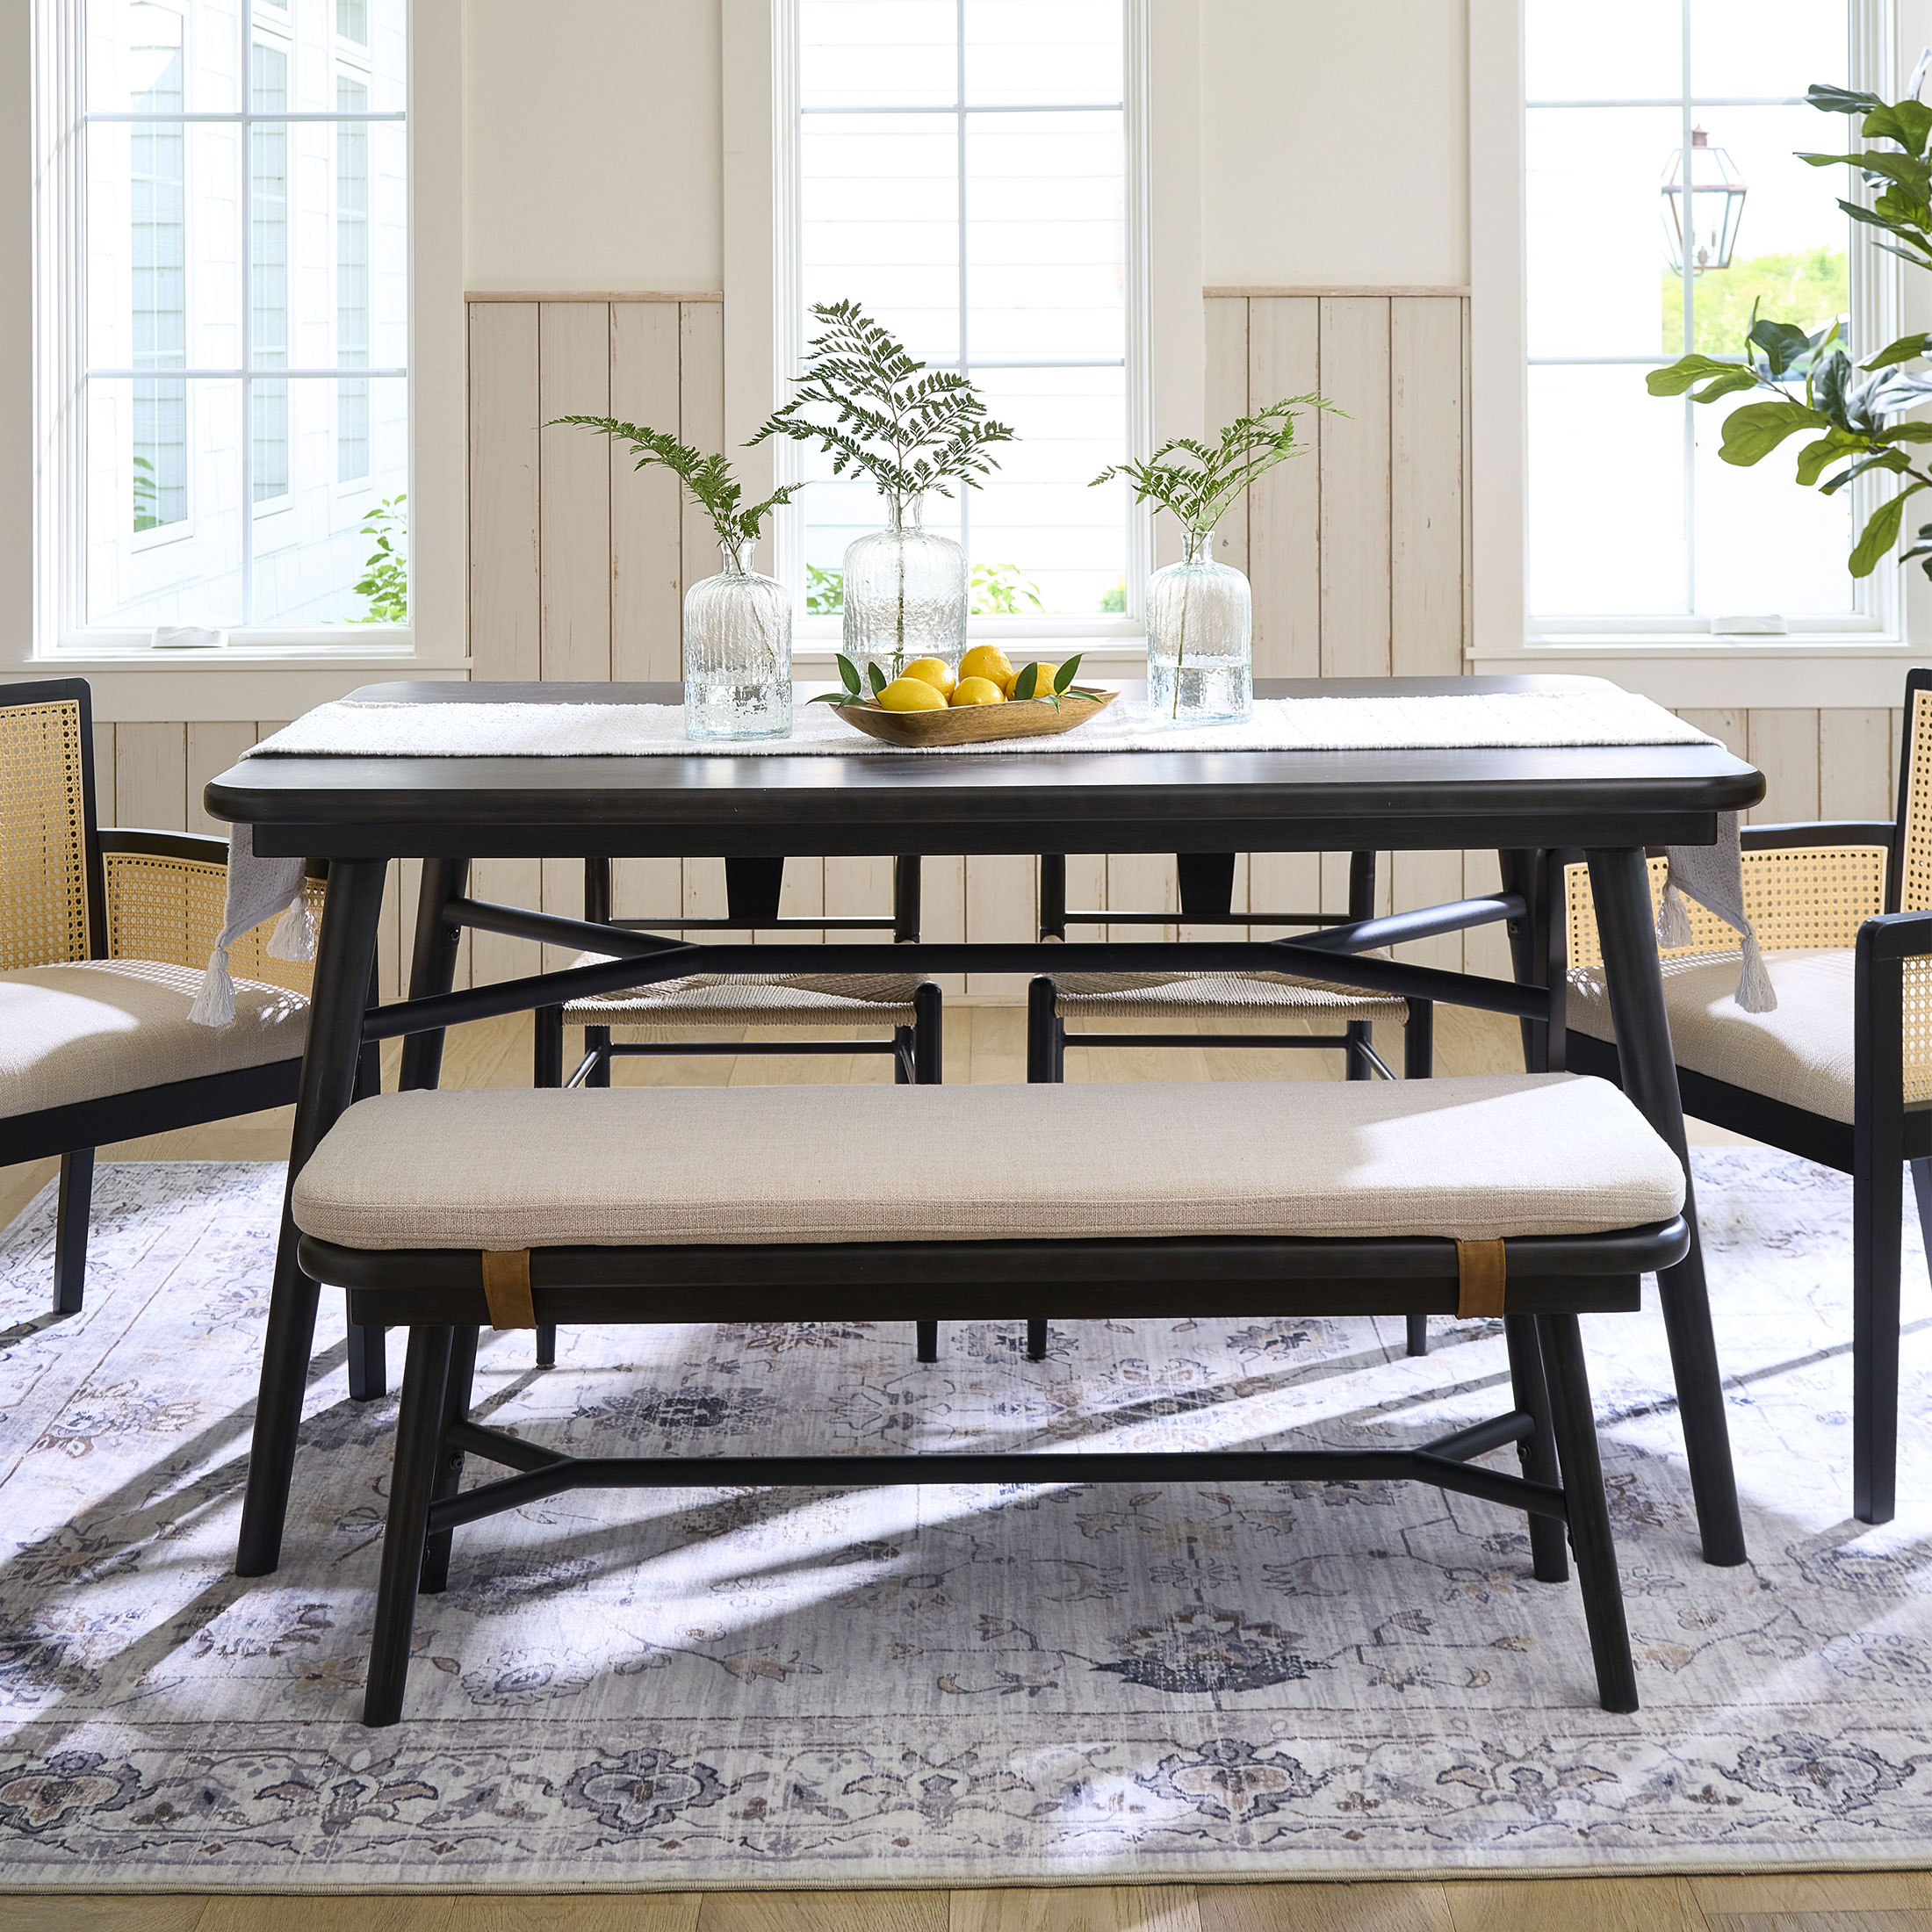 Better Homes & Gardens Springwood Dining Table, Charcoal - image 4 of 15